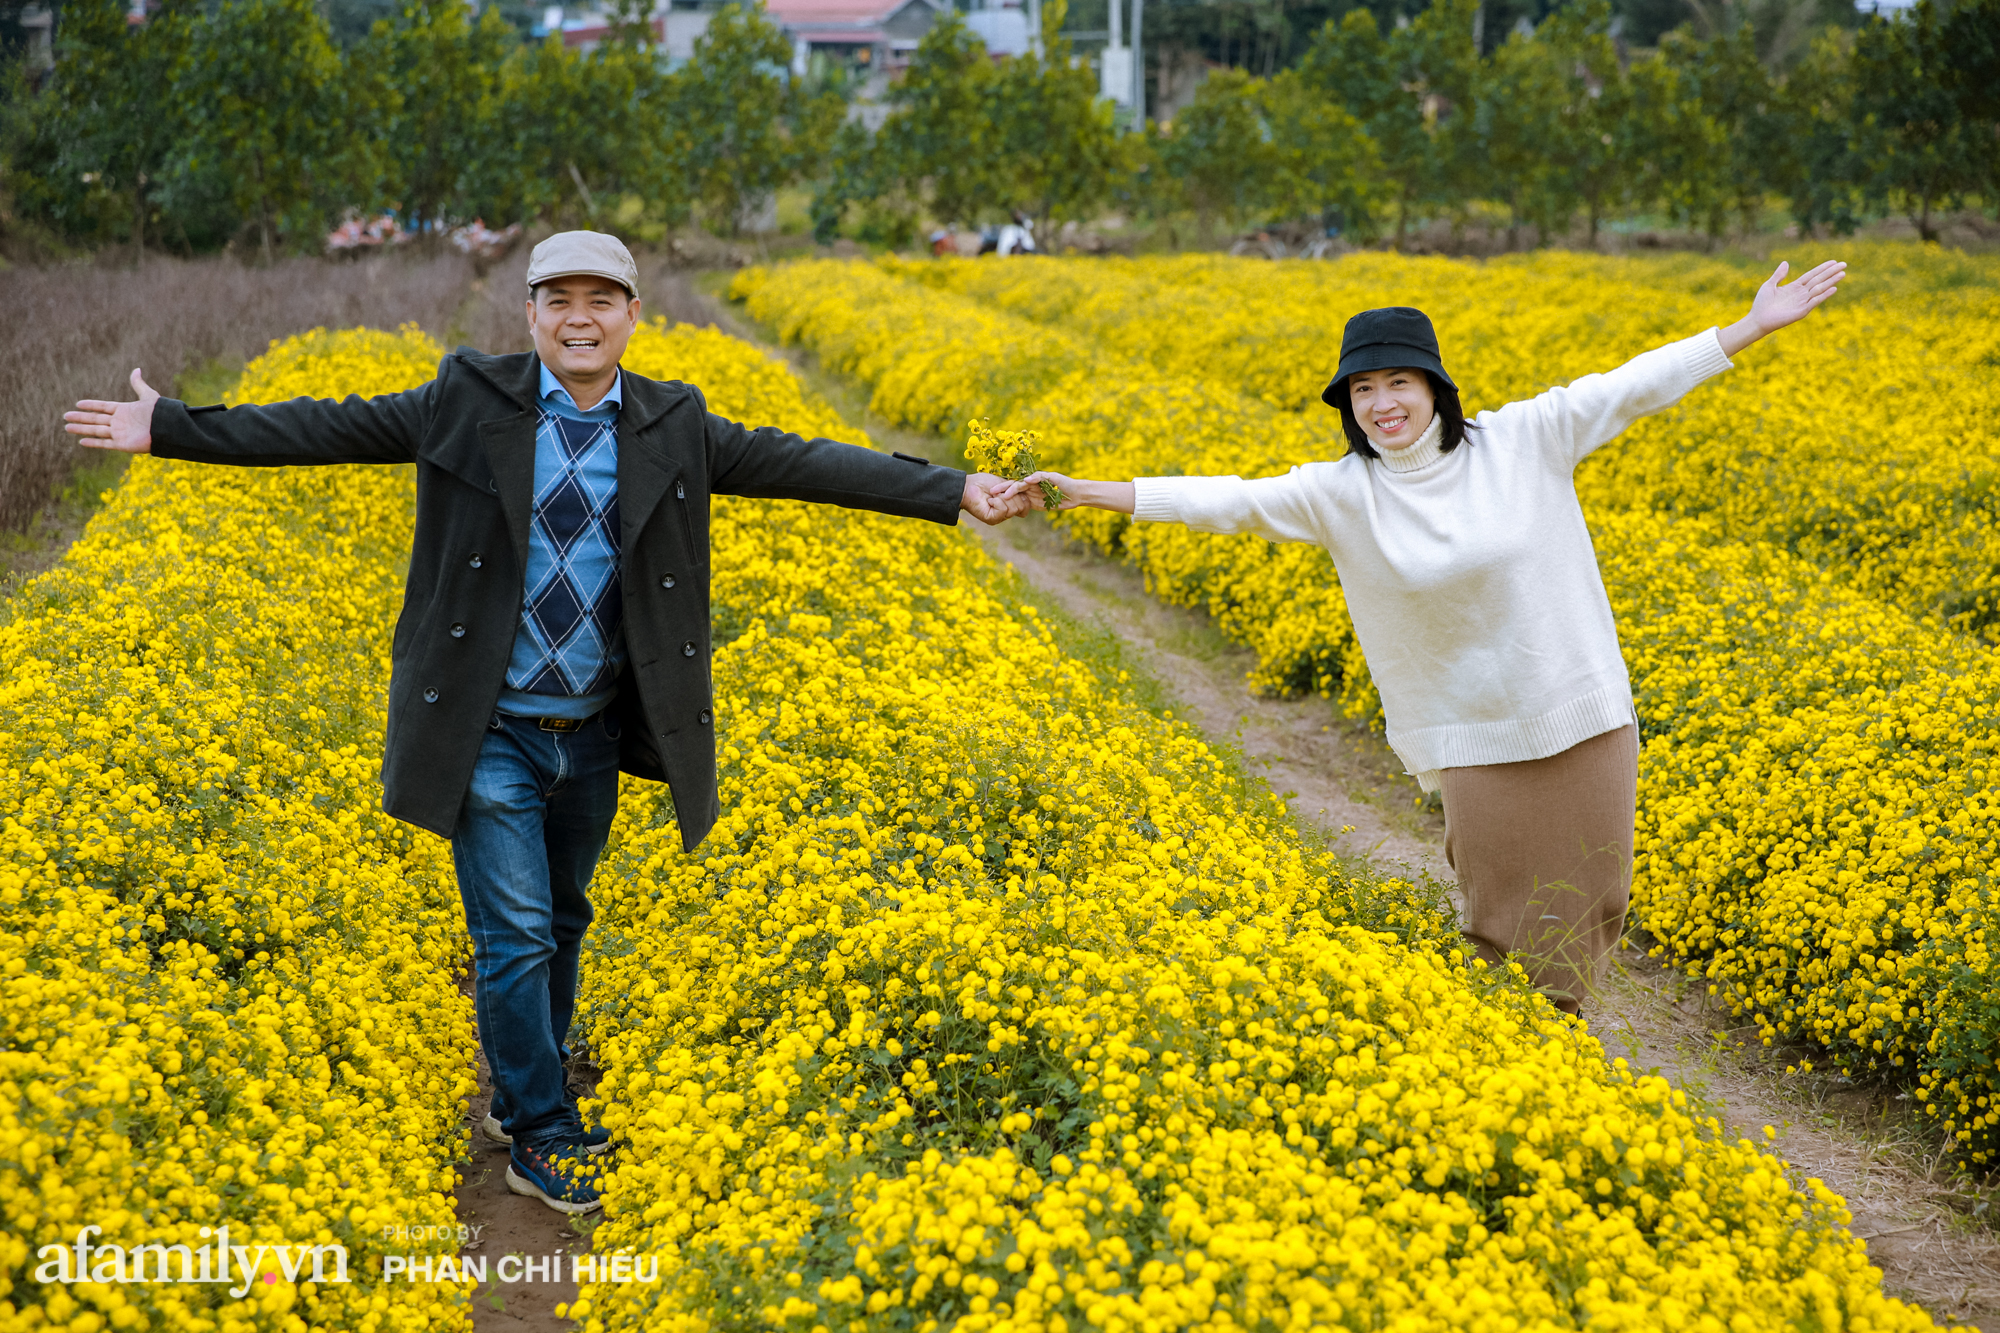 Visit a hundred-year village near Hanoi, possessing the "kingly" chrysanthemum fields  golden, making people everywhere pouring in to take pictures - Photo 7.